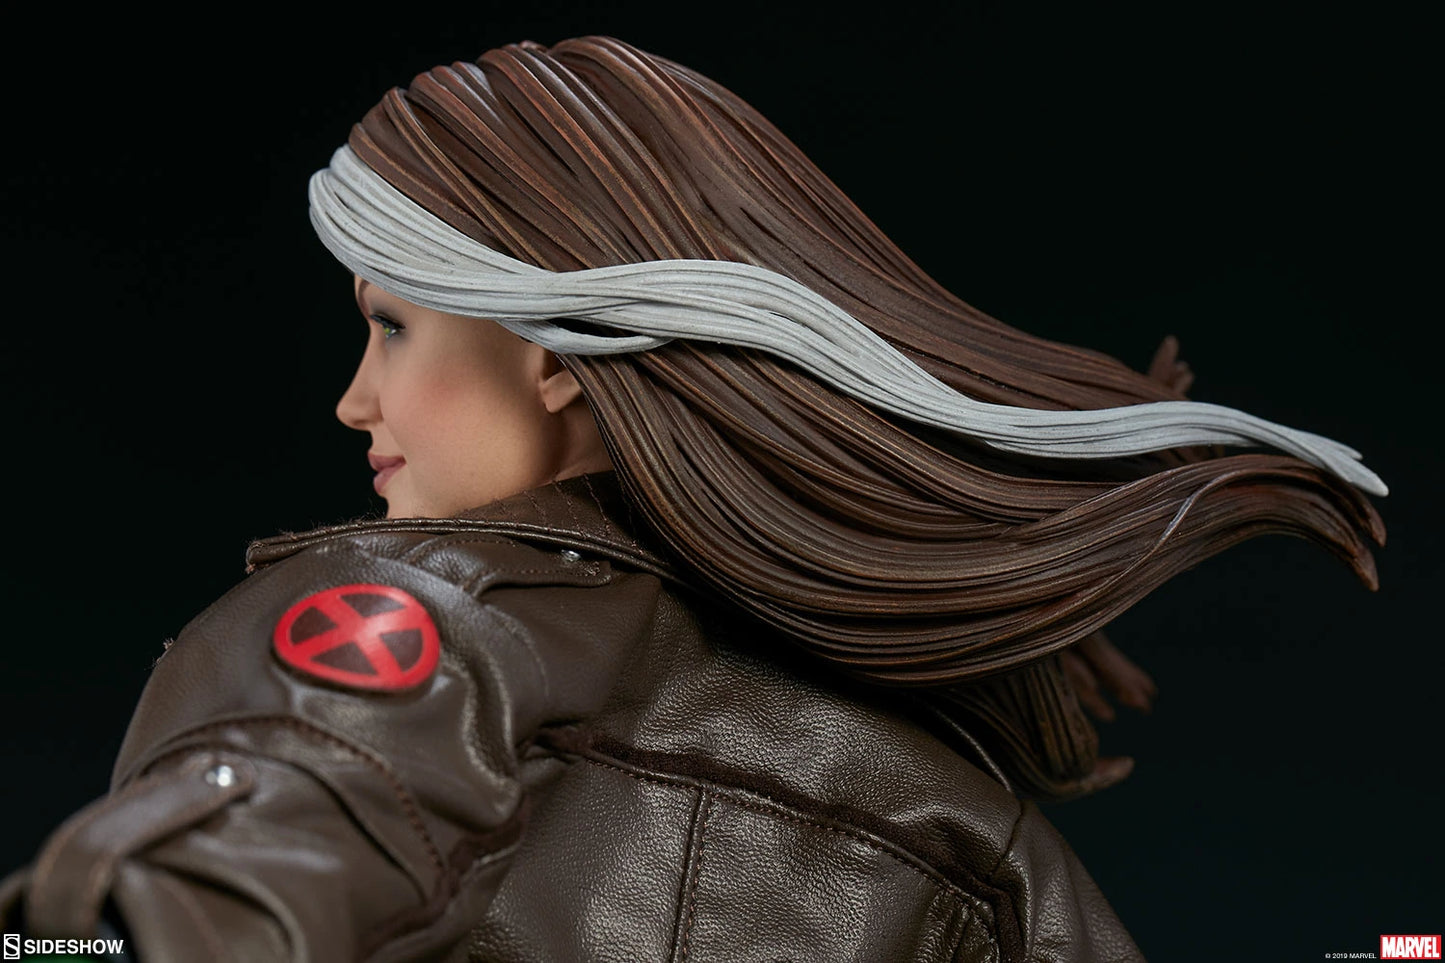 SIDESHOW COLLECTIBLES ROGUE MAQUETTE - 300687 - Anotoys Collectibles